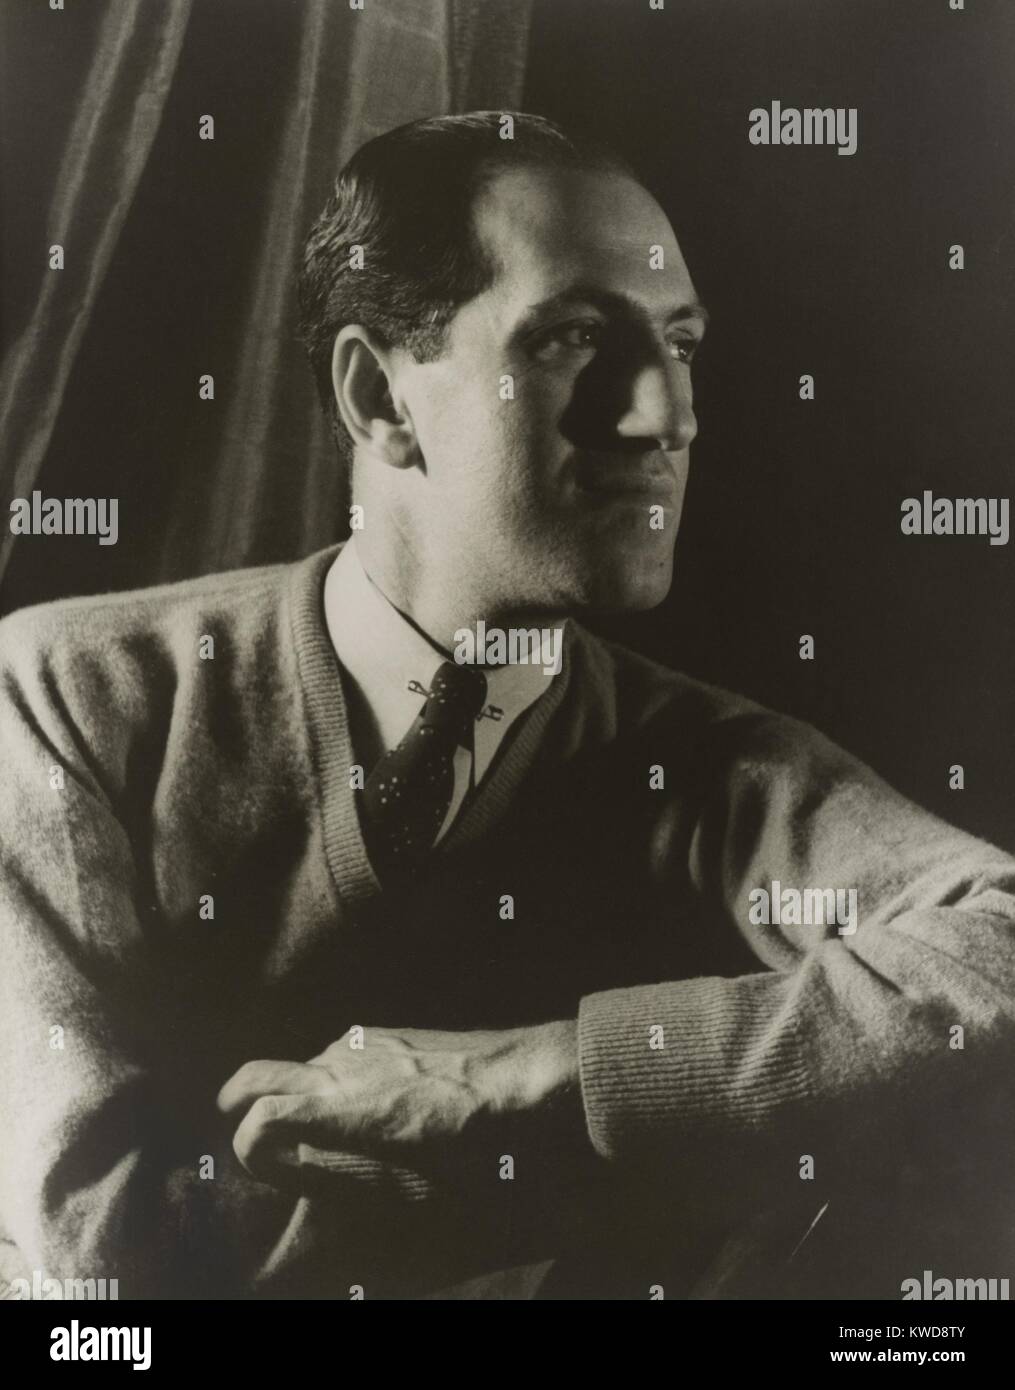 George Gershwin, American composer, portrait by Carl Van Vechten, March 28, 1937. His music was featured in several movies: The Sunshine Trail, 1923; Delicious, 1931; Shall We Dance, 1937; A Damsel in Distress, 1937; The Goldwyn Follies, 1938; Porgy and B (BSLOC 2016 8 128) Stock Photo